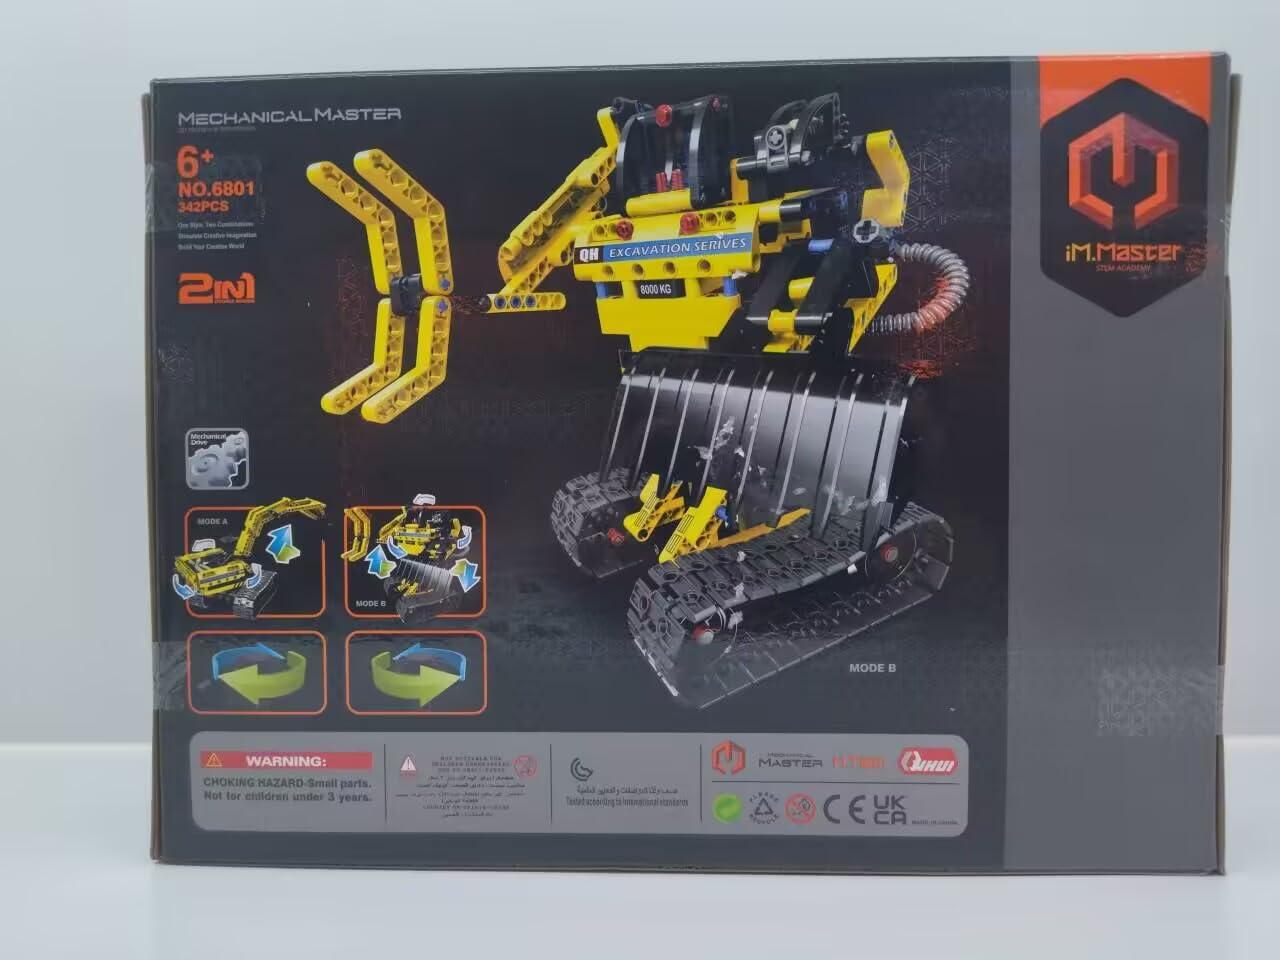 OKKIDY Building Toys Sets Excavators Robot 2-in-1, Technic Building Blocks, 342 PCS STEM Building Blocks Crane Toy Crawler Excavator & Robot Gift for Children 6 7 8 9 10 Years Old 3